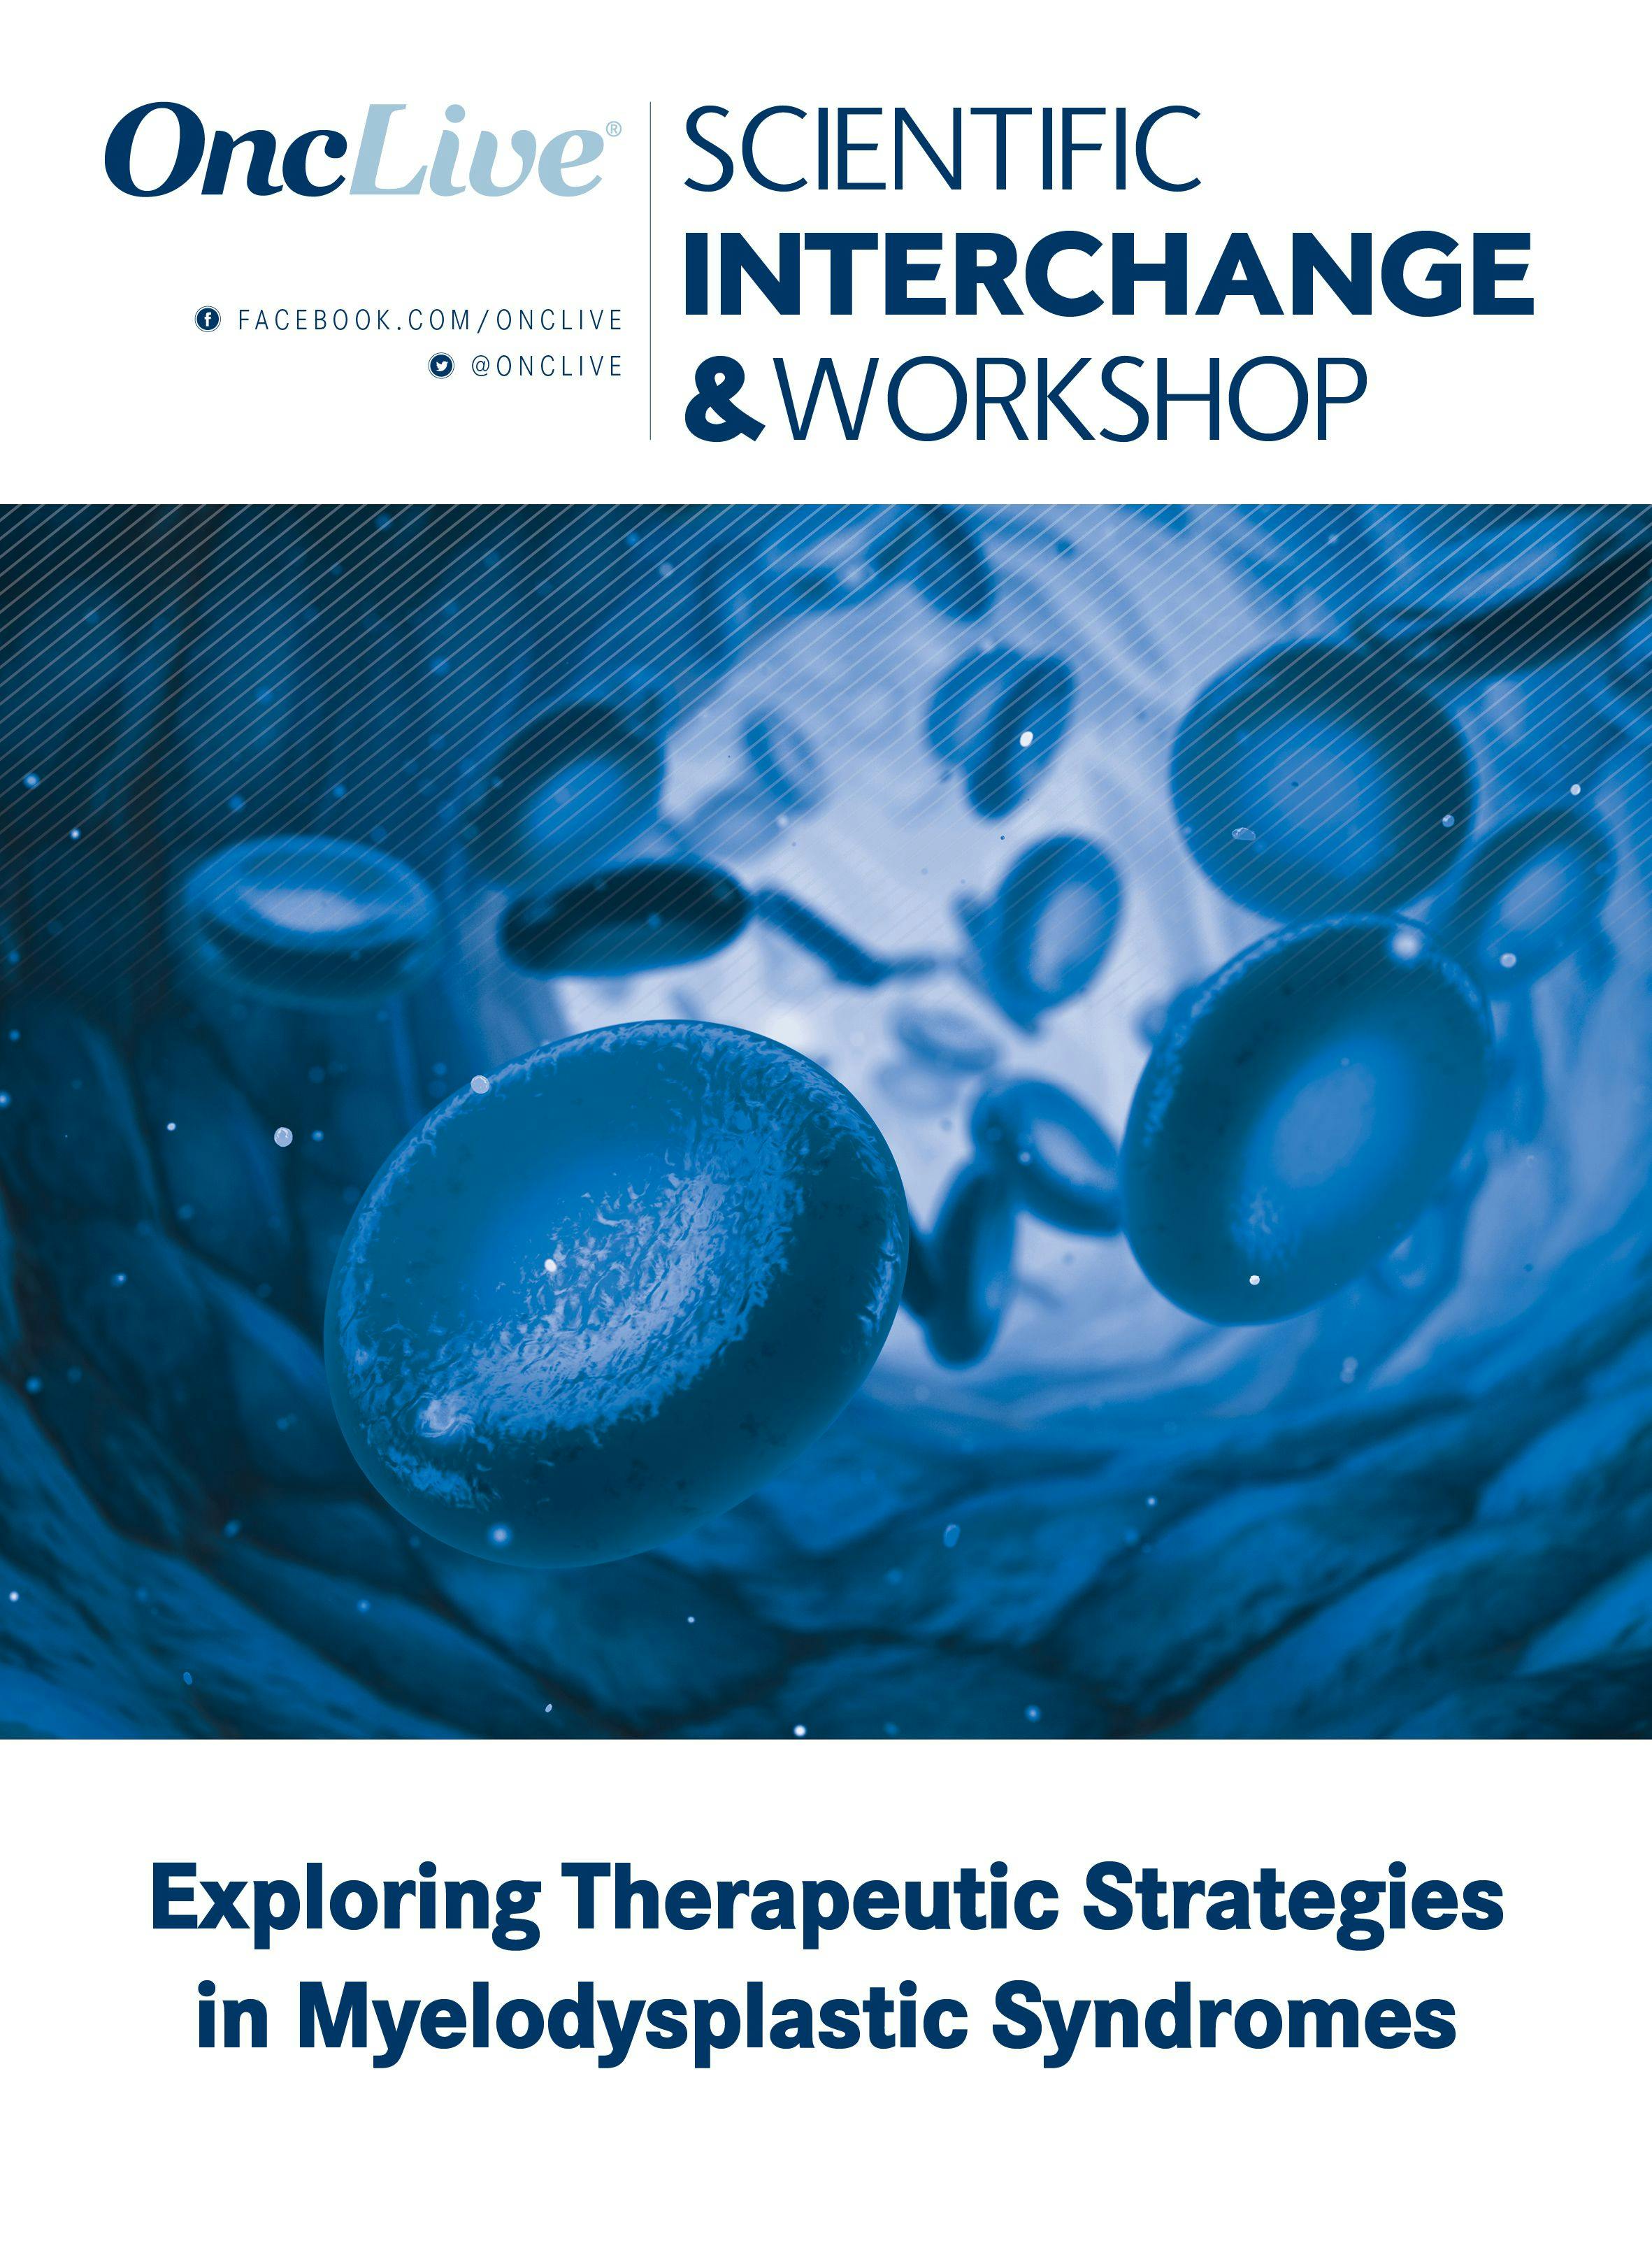 Exploring Therapeutic Strategies in Myelodysplastic Syndromes